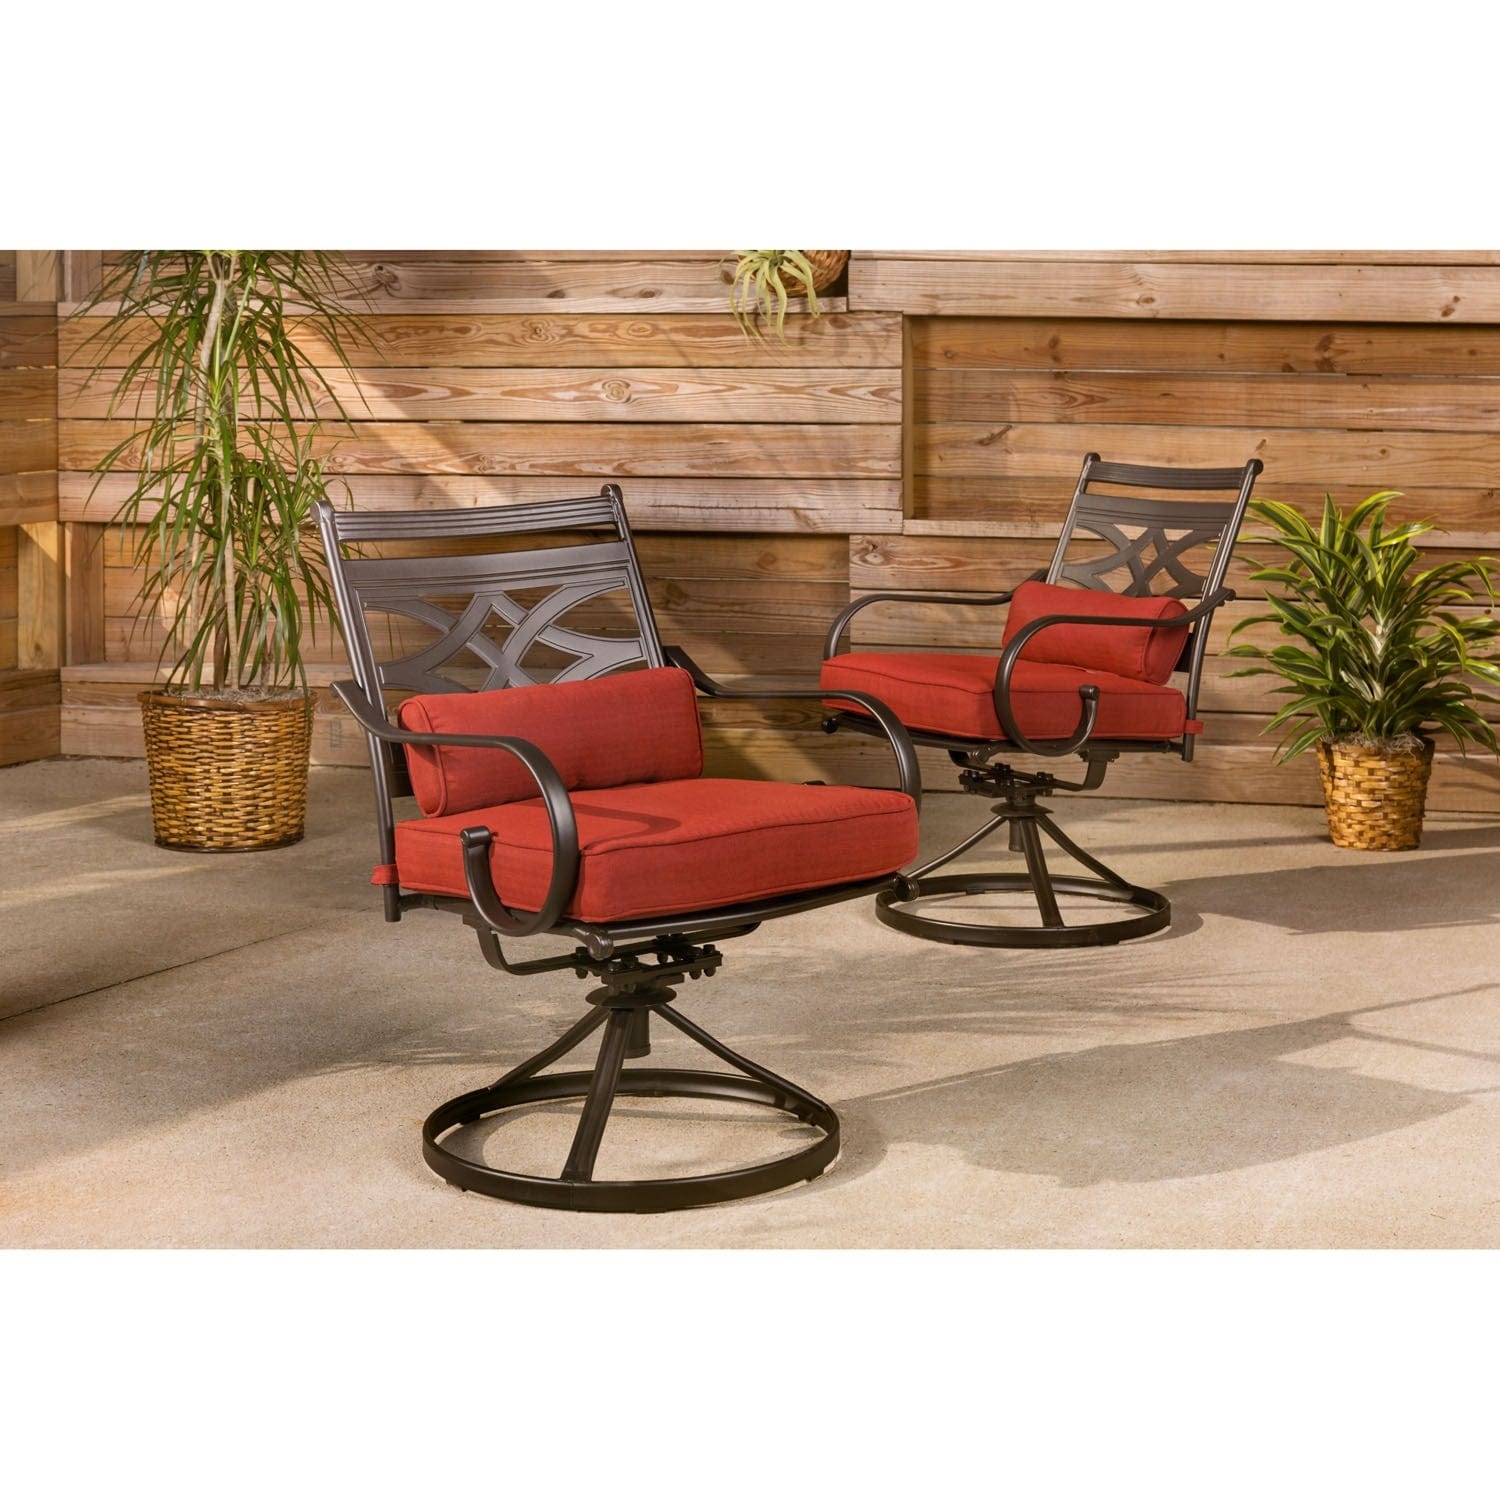 Hanover Outdoor Dining Set Hanover Montclair 5-Piece Patio Dining Set in Chili Red with 4 Swivel Rockers and a 40-Inch Square Table | MCLRDN5PCSQSW4-CHL